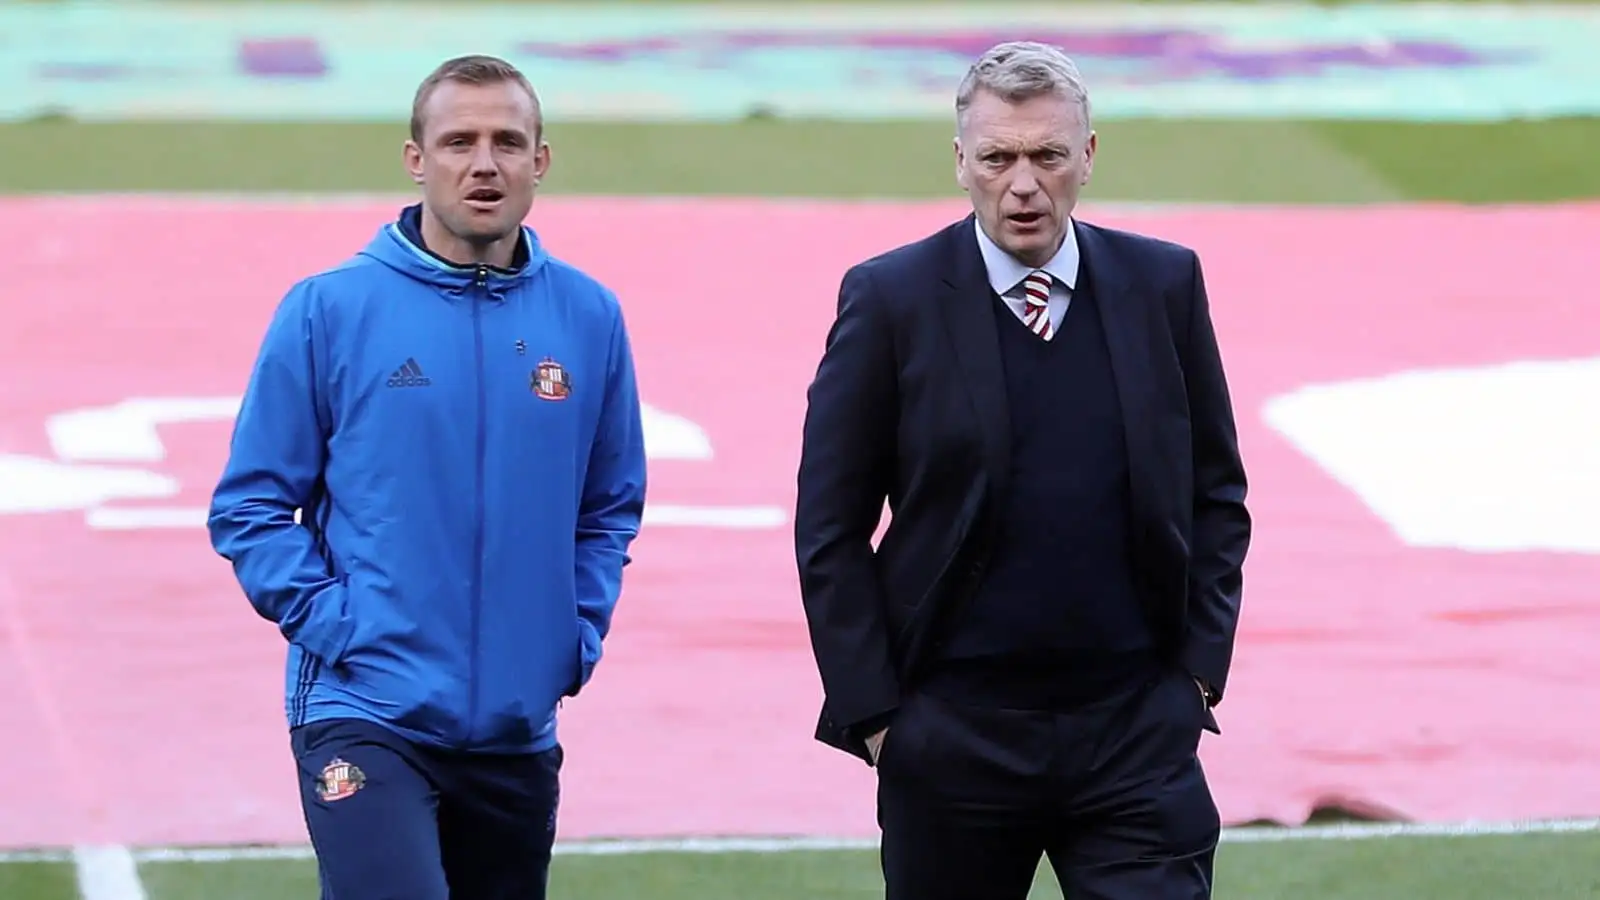 Lee Cattermole (left) and manager David Moyes survey the pitch before kick off during the Premier League match at the Riverside Stadium, Middlesbrough